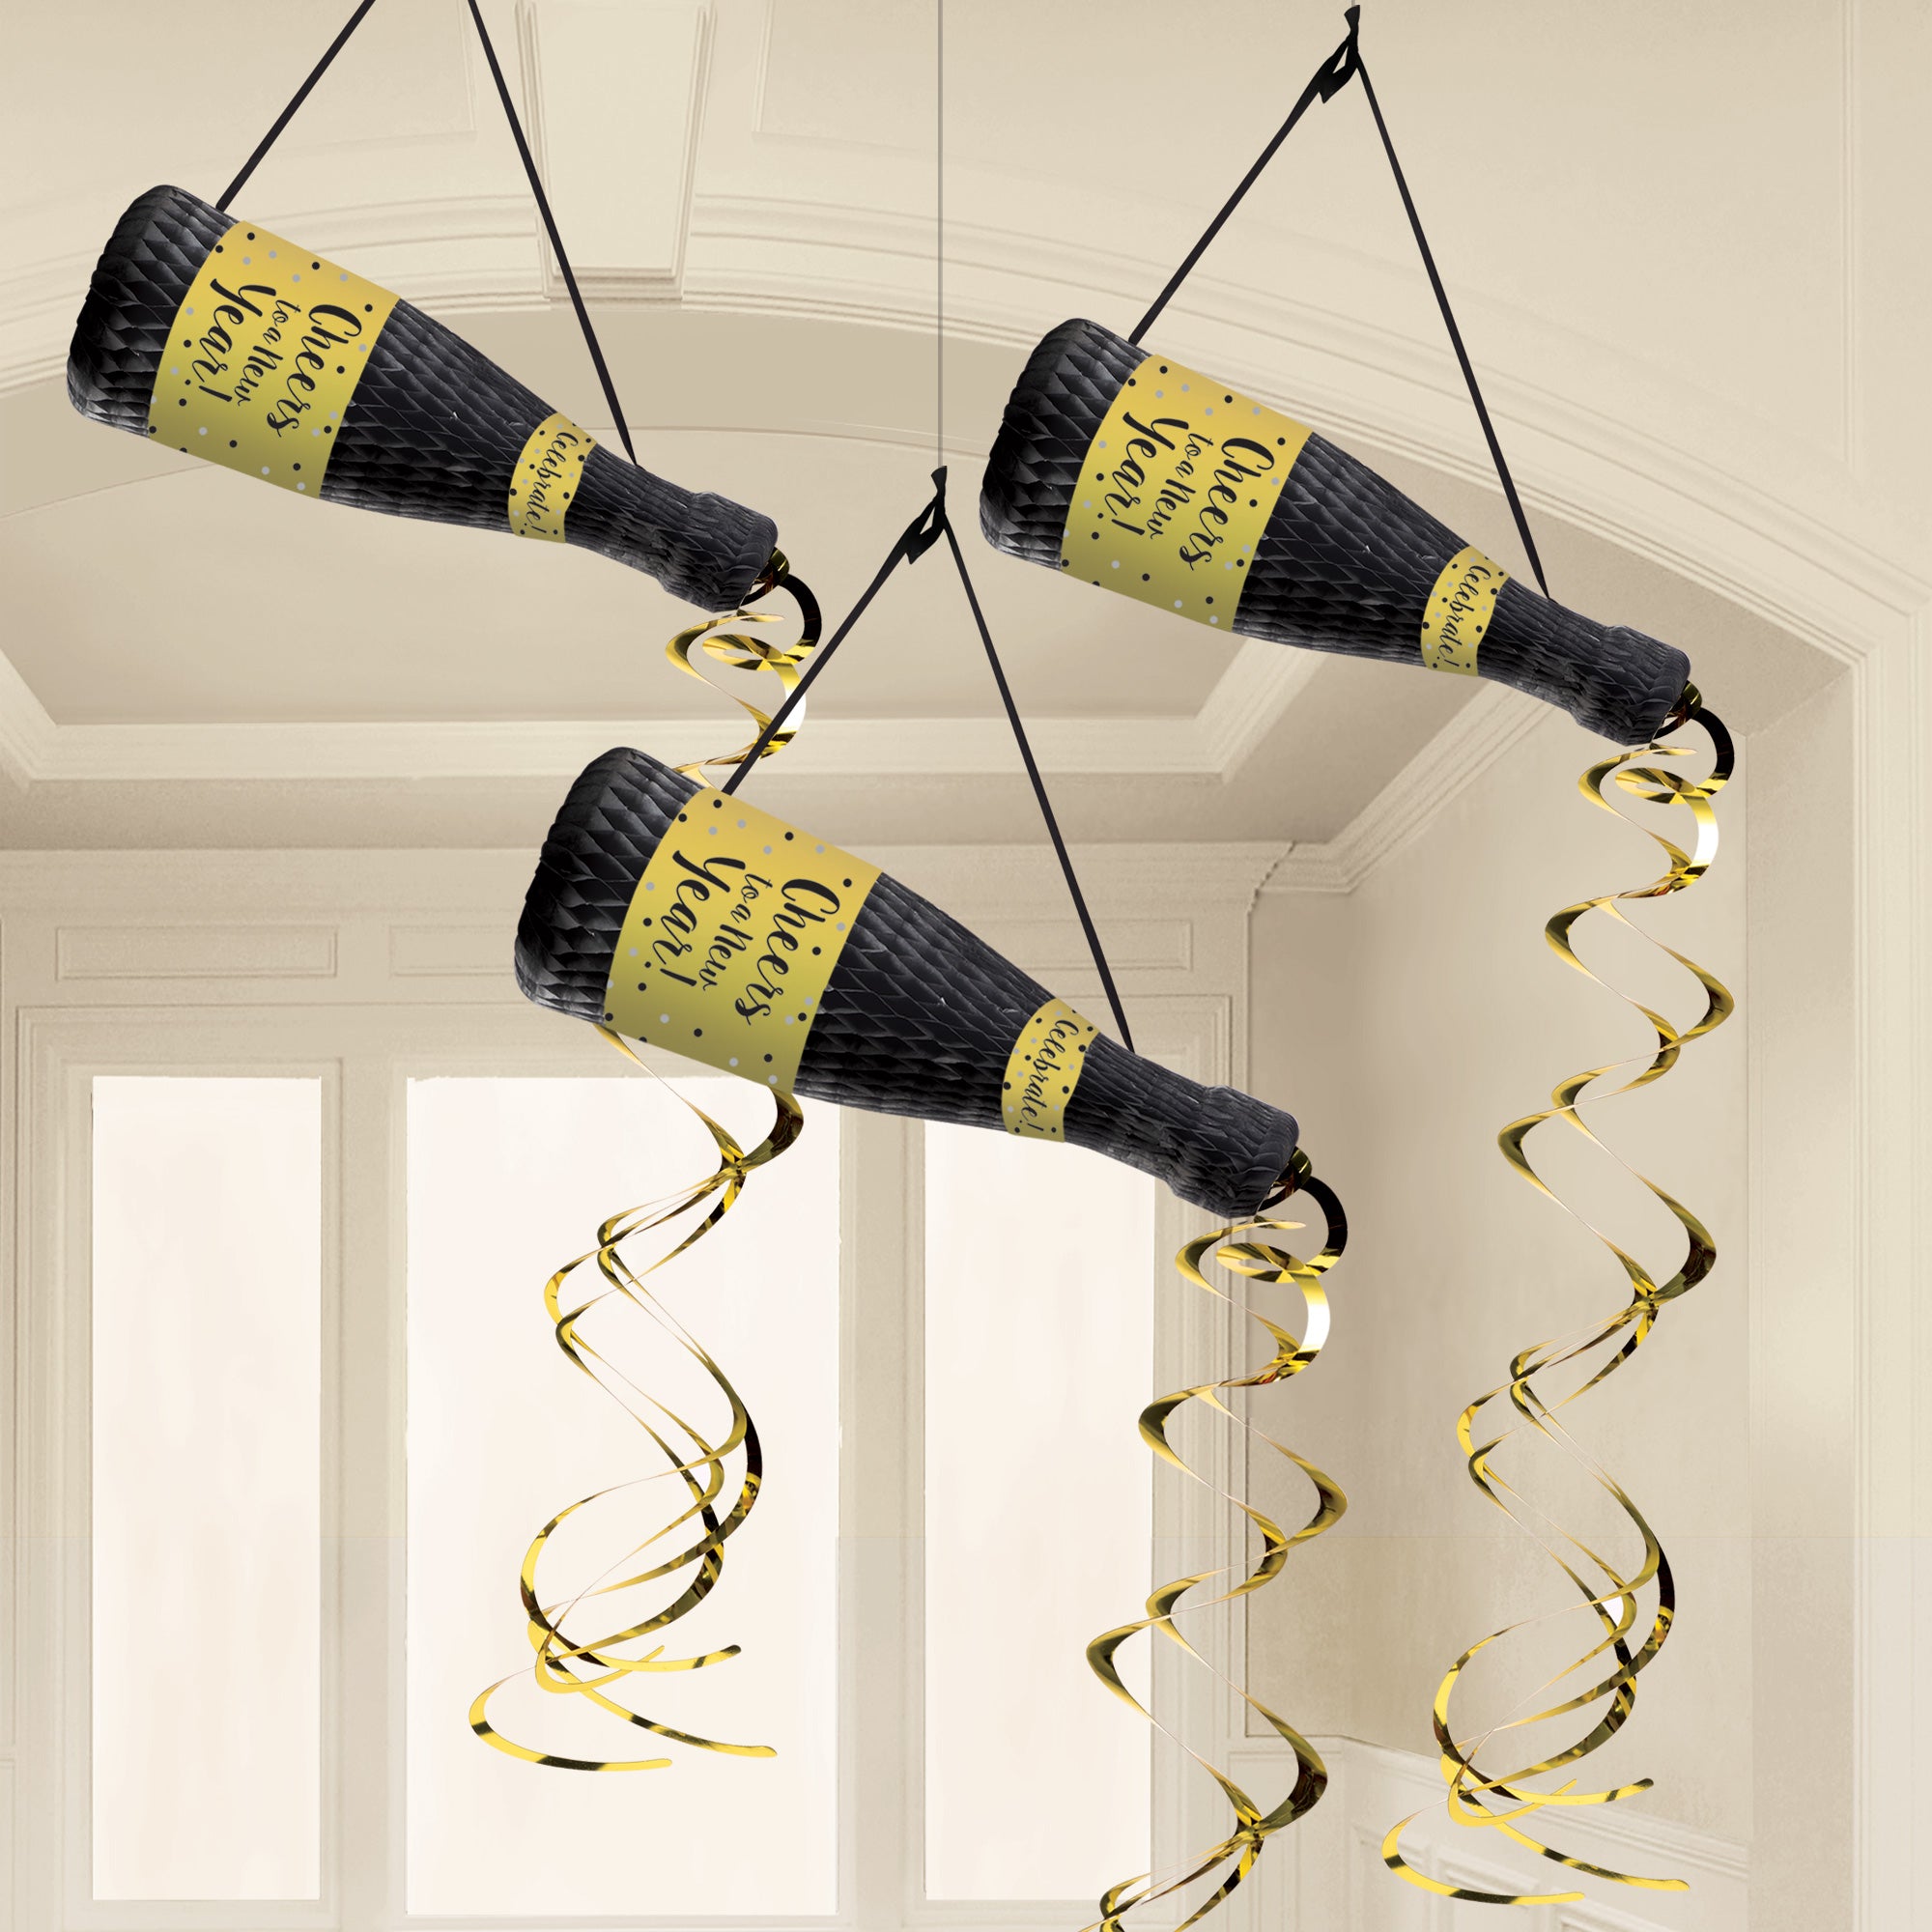 New Year Champagne Bottle Hanging Decorations, 3 Count